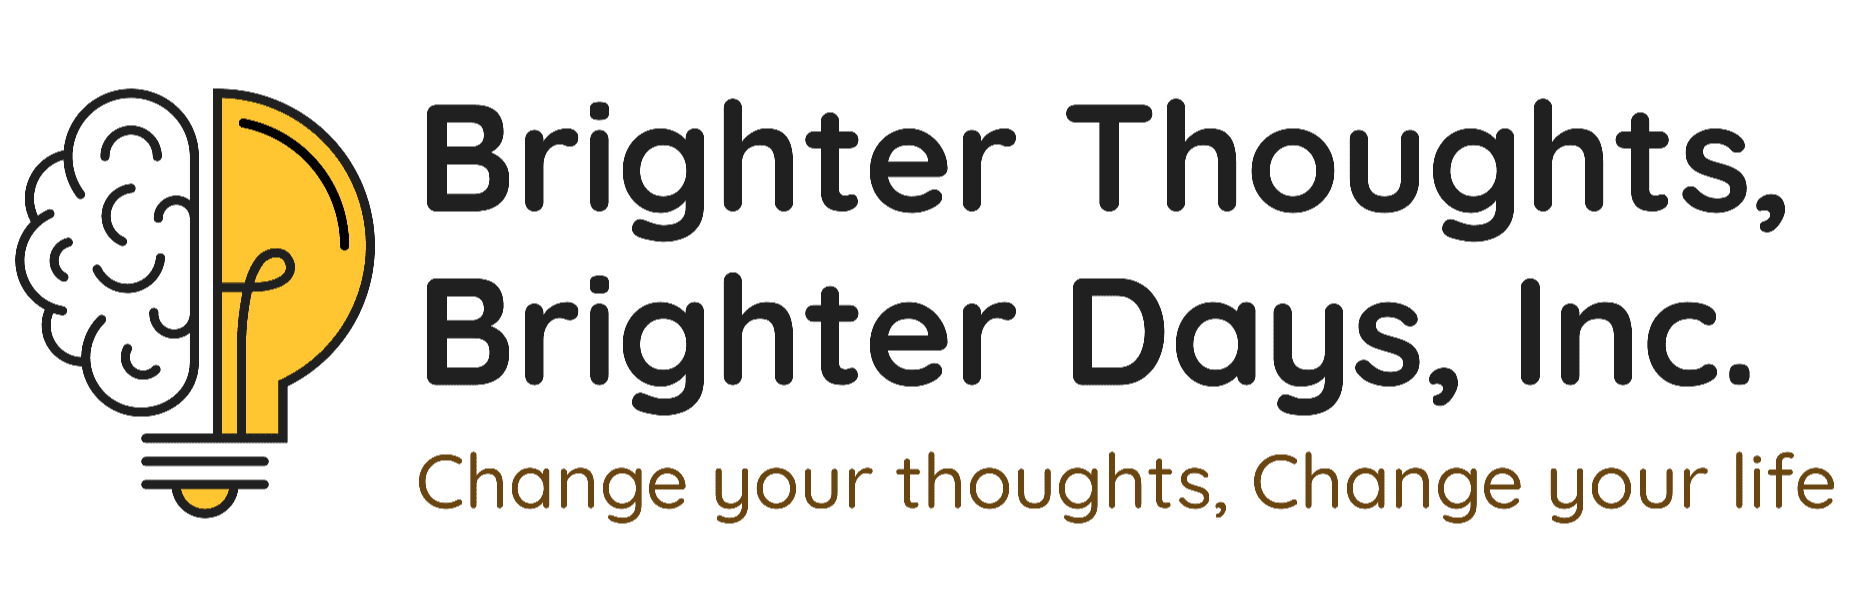 Brighter Thoughts, Brighter Days, Inc.